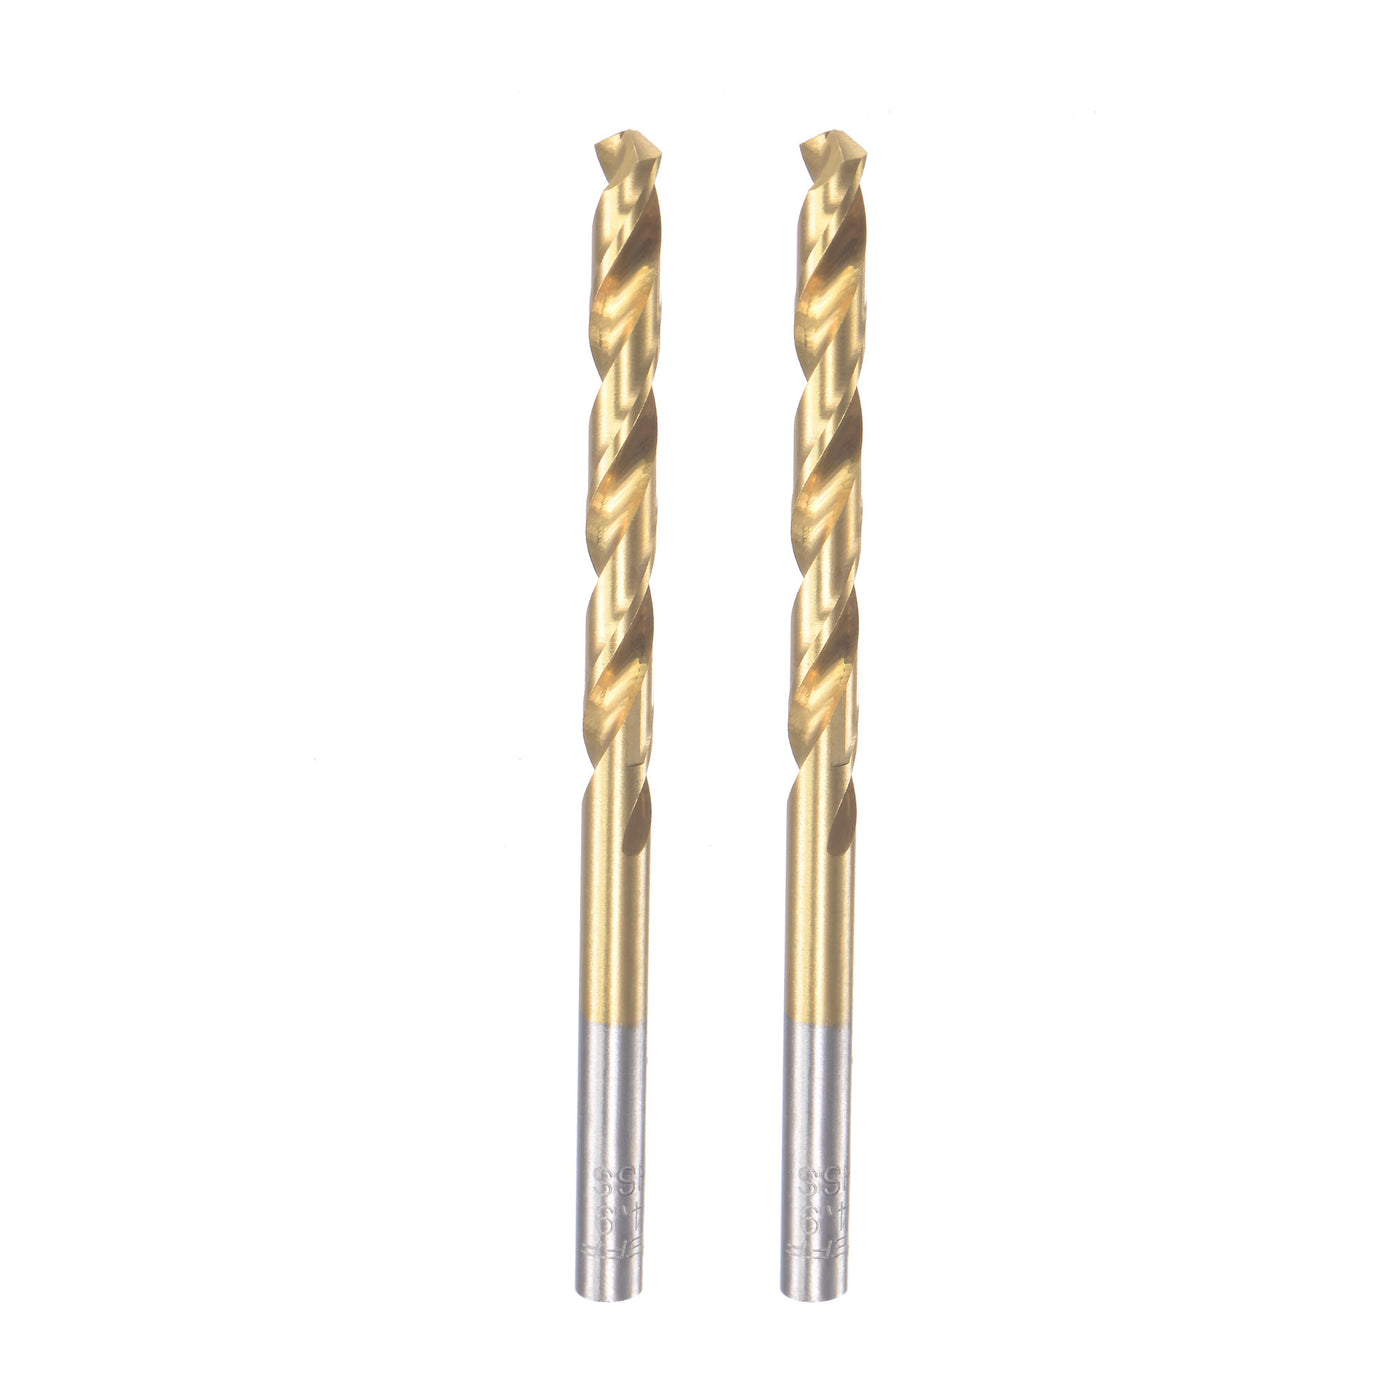 uxcell Uxcell High Speed Steel Twist Drill Bit 4.9mm Fully Ground Titanium Coated 2 Pcs